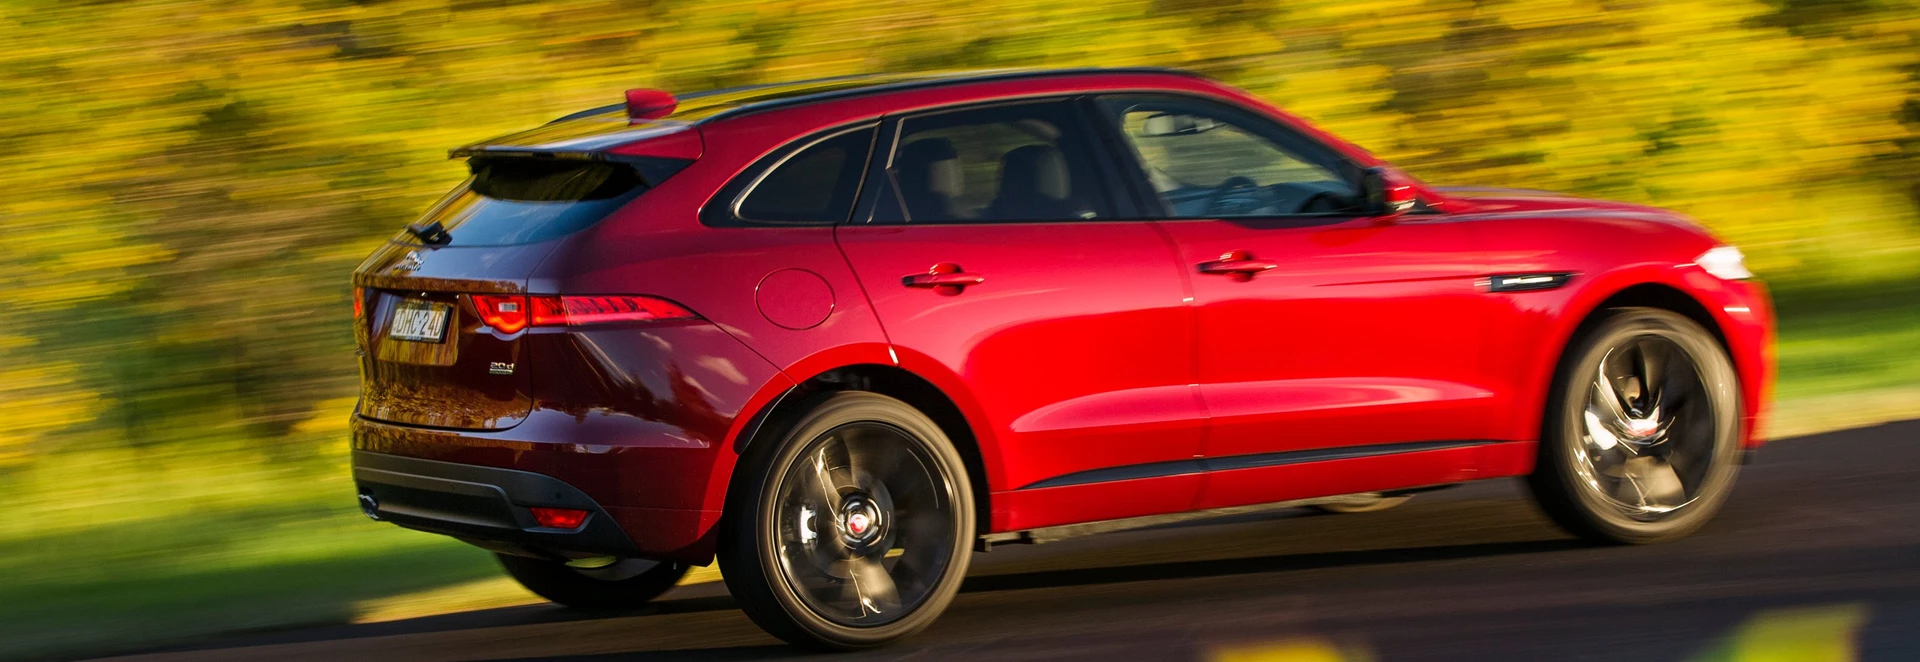 Jaguar F-PACE SVR with 567bhp reportedly coming later in 2017